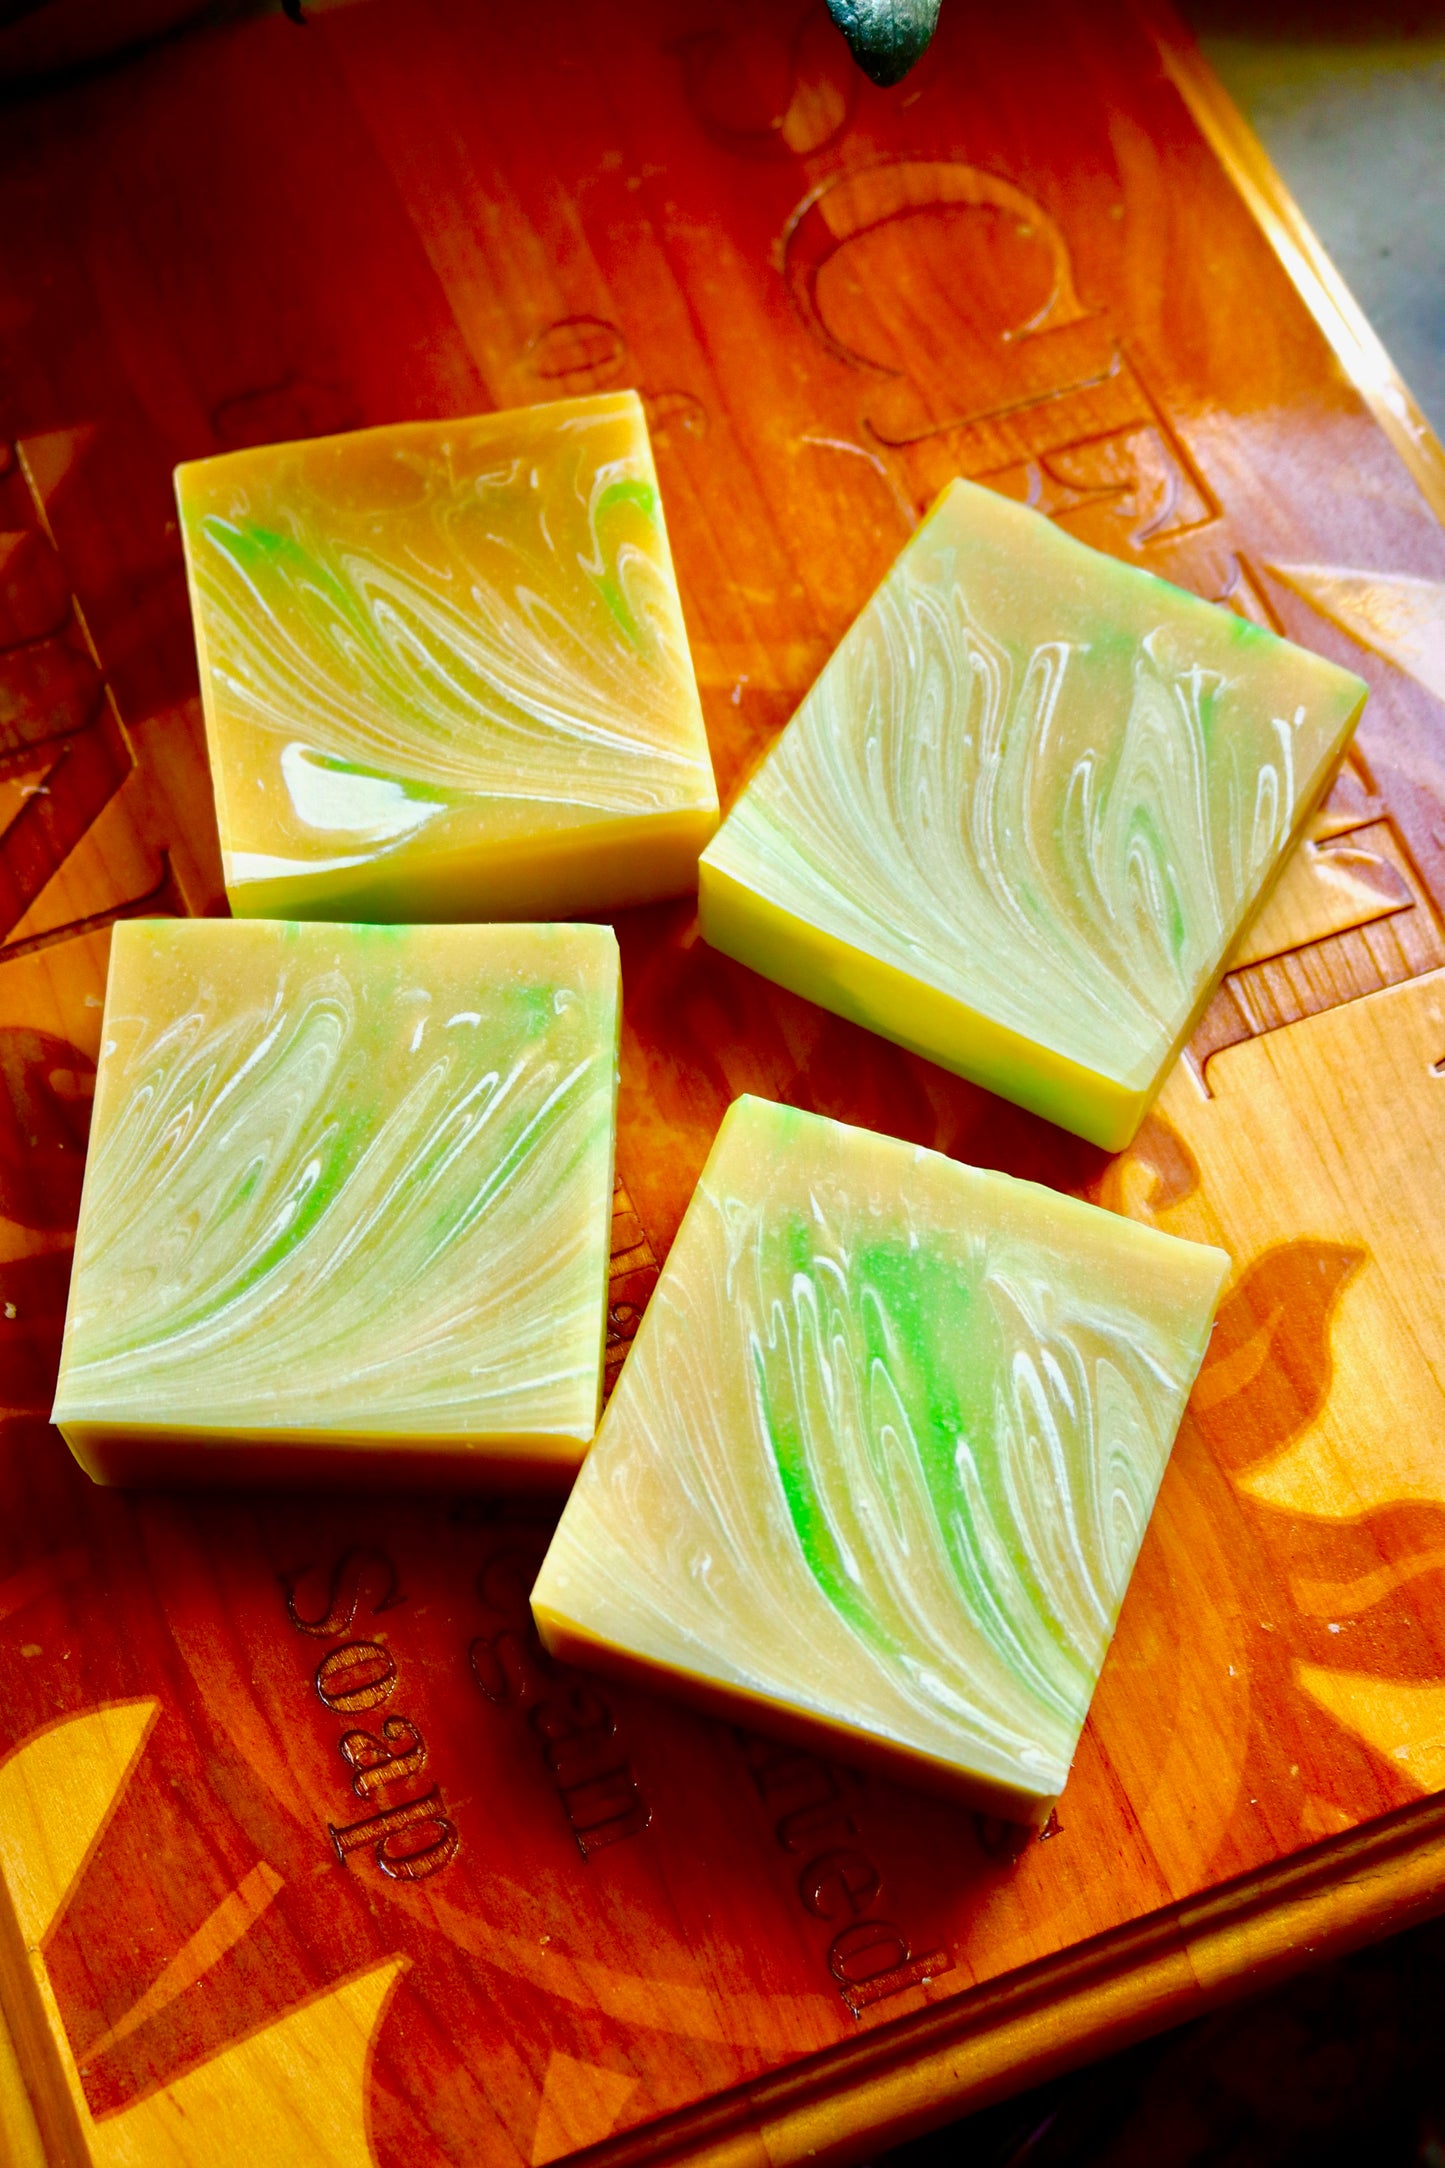 Honeysuckle bar soaps with kaolin clay, shea butter, and cocoa butter